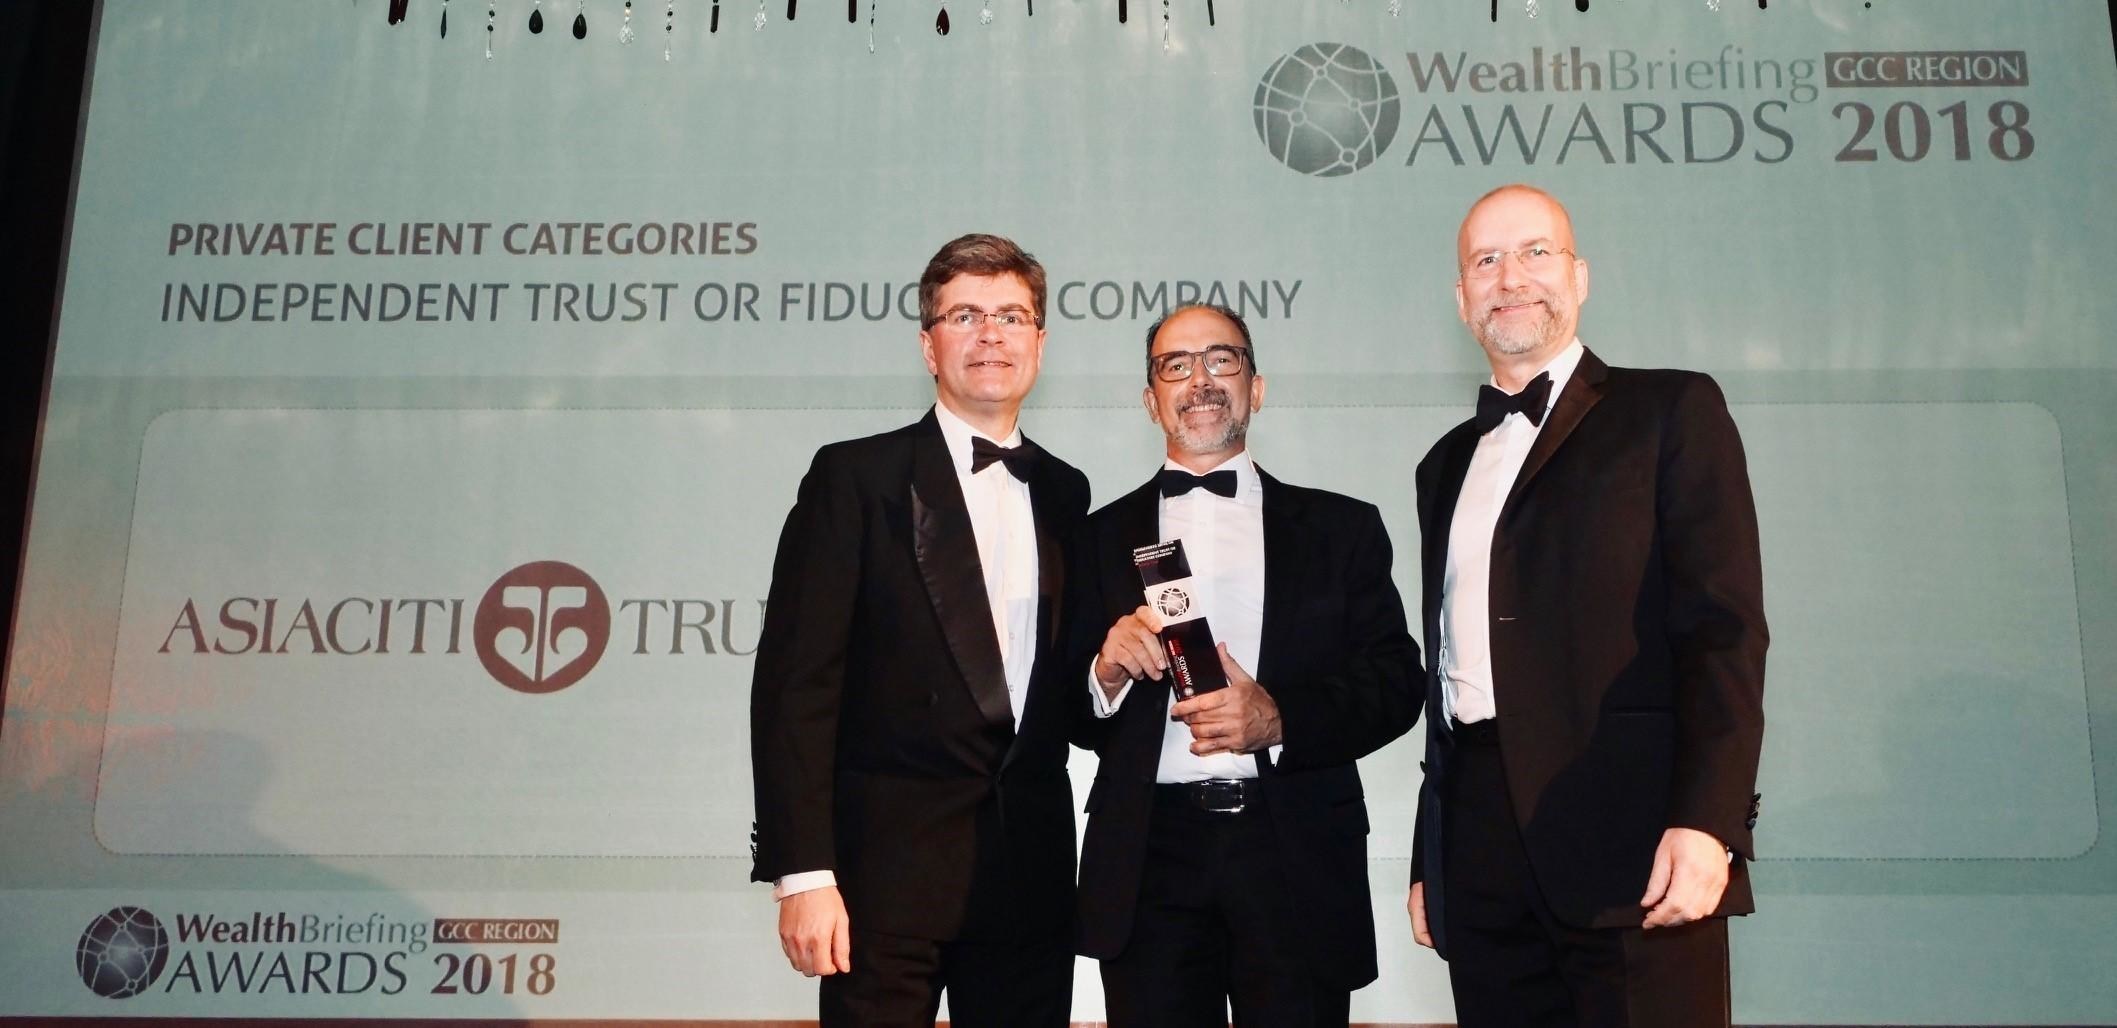 Laurence Black, Regional Director, Client Solutions, EMEA, collects Asiaciti Trust's award at the WealthBriefing GCC Region Awards 2018